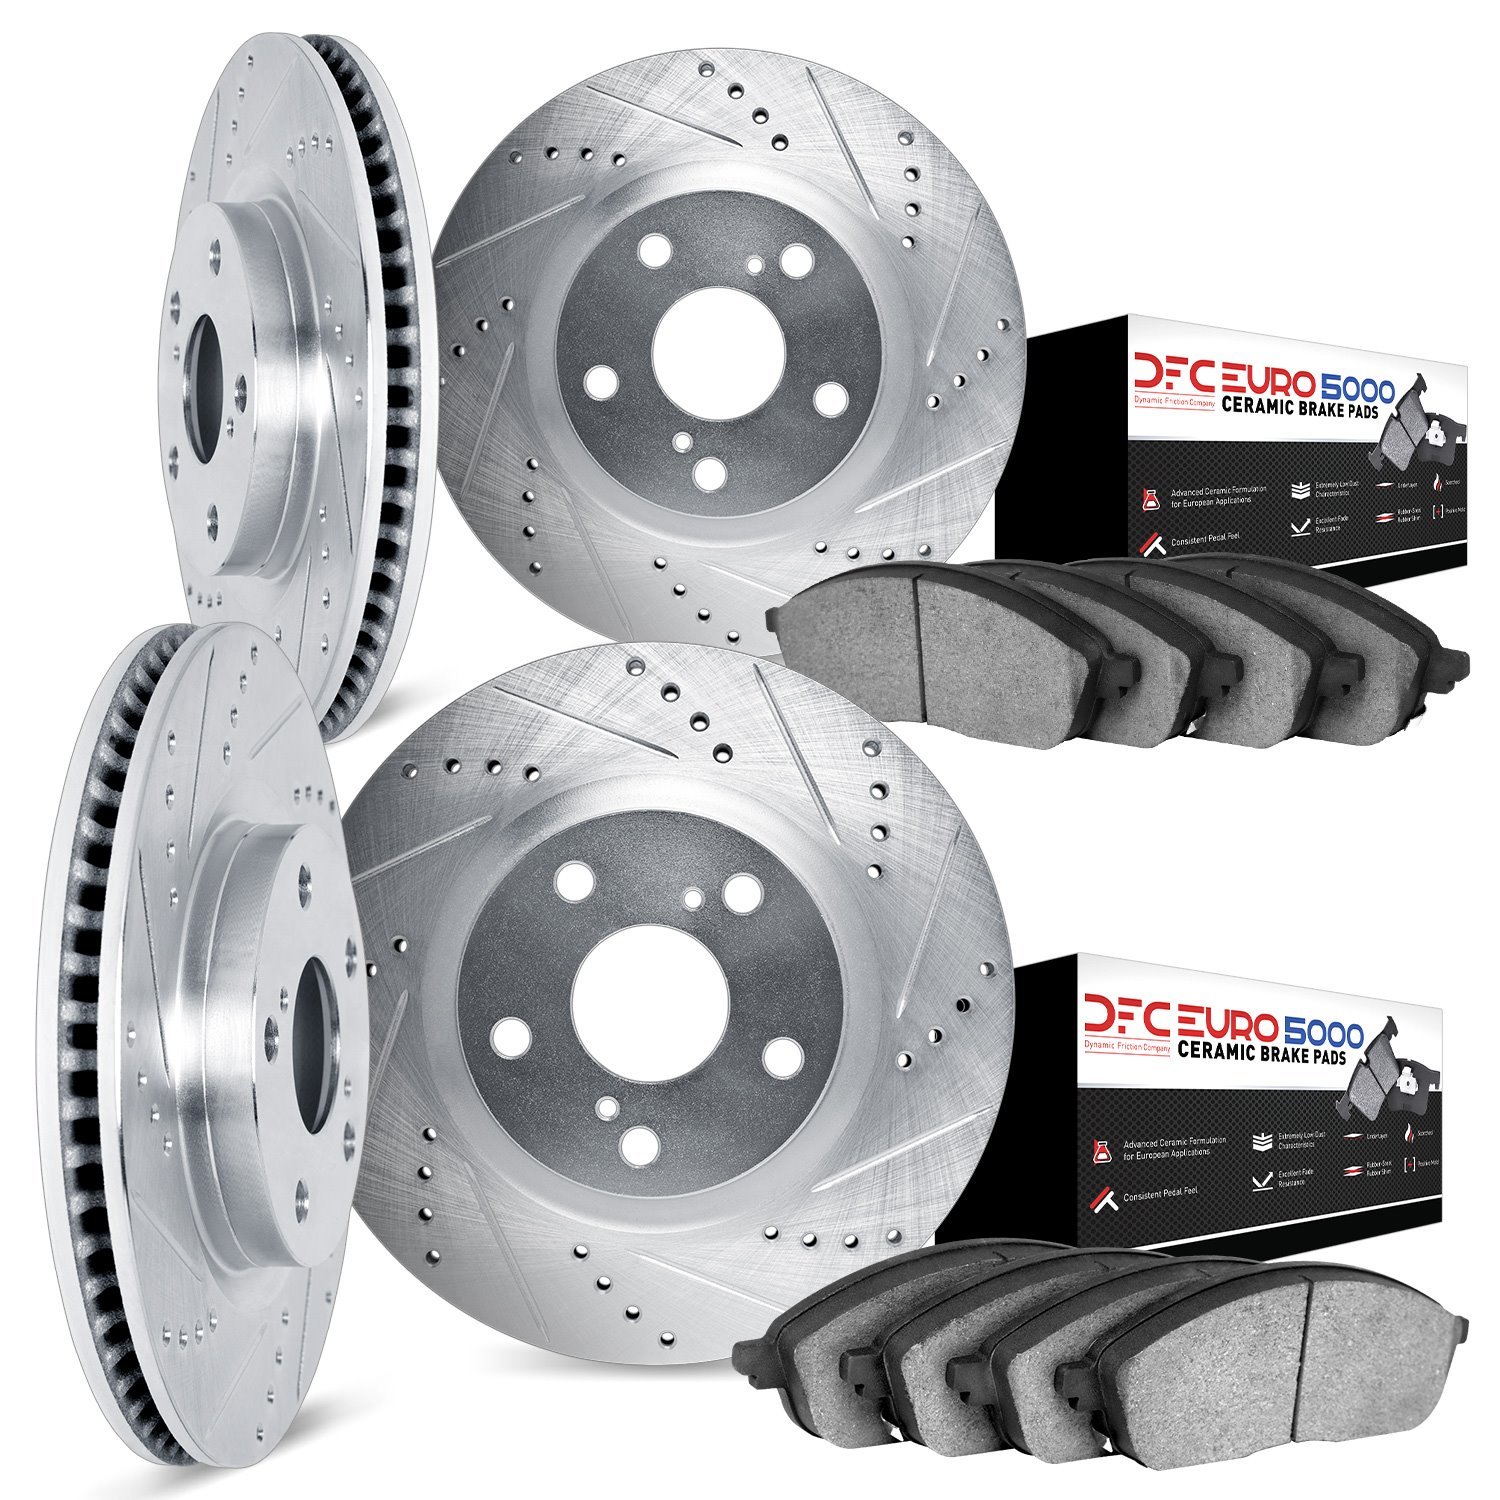 7604-20007 Drilled/Slotted Brake Rotors w/5000 Euro Ceramic Brake Pads Kit [Silver], 2003-2005 Jaguar, Position: Front and Rear